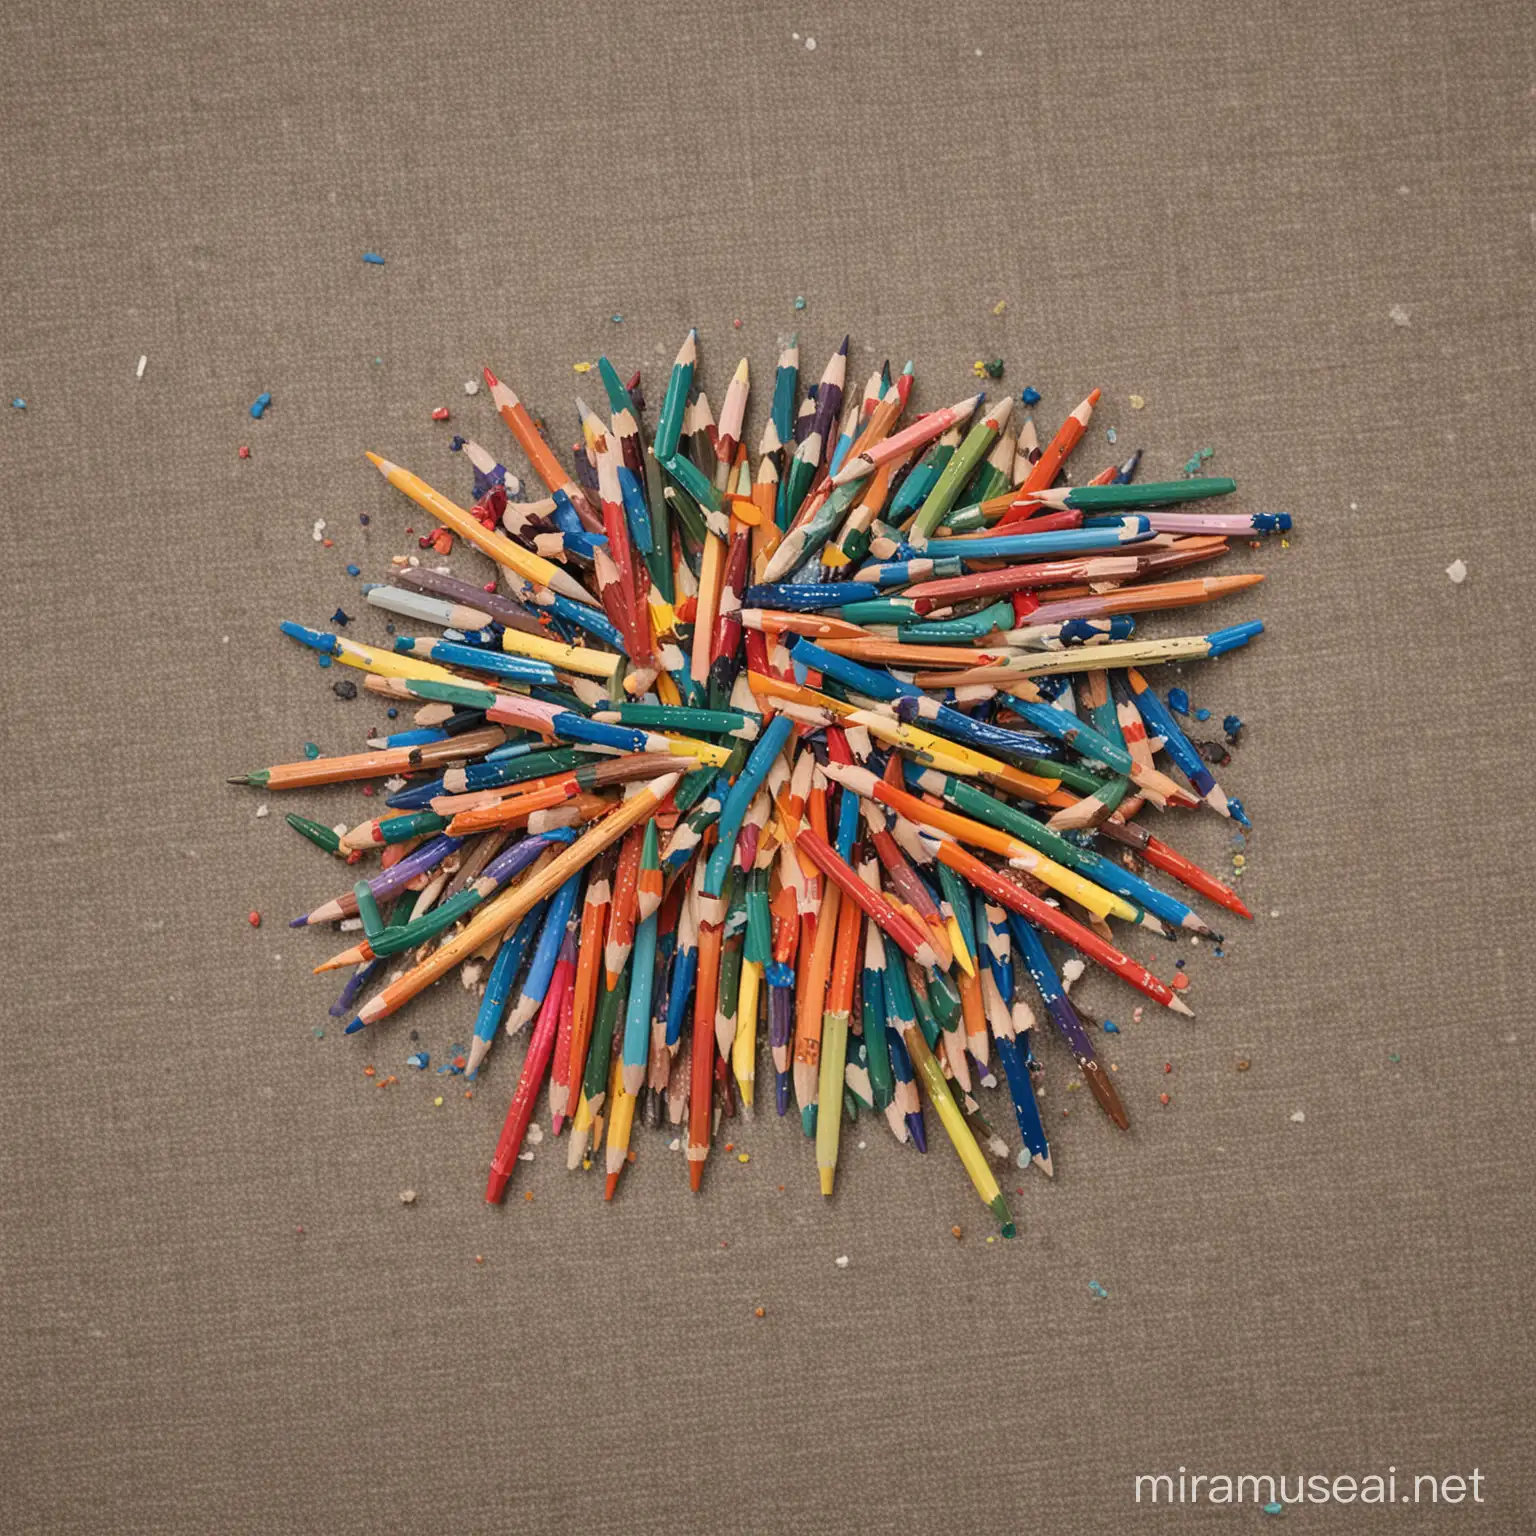 colored pencils scattered on a seat